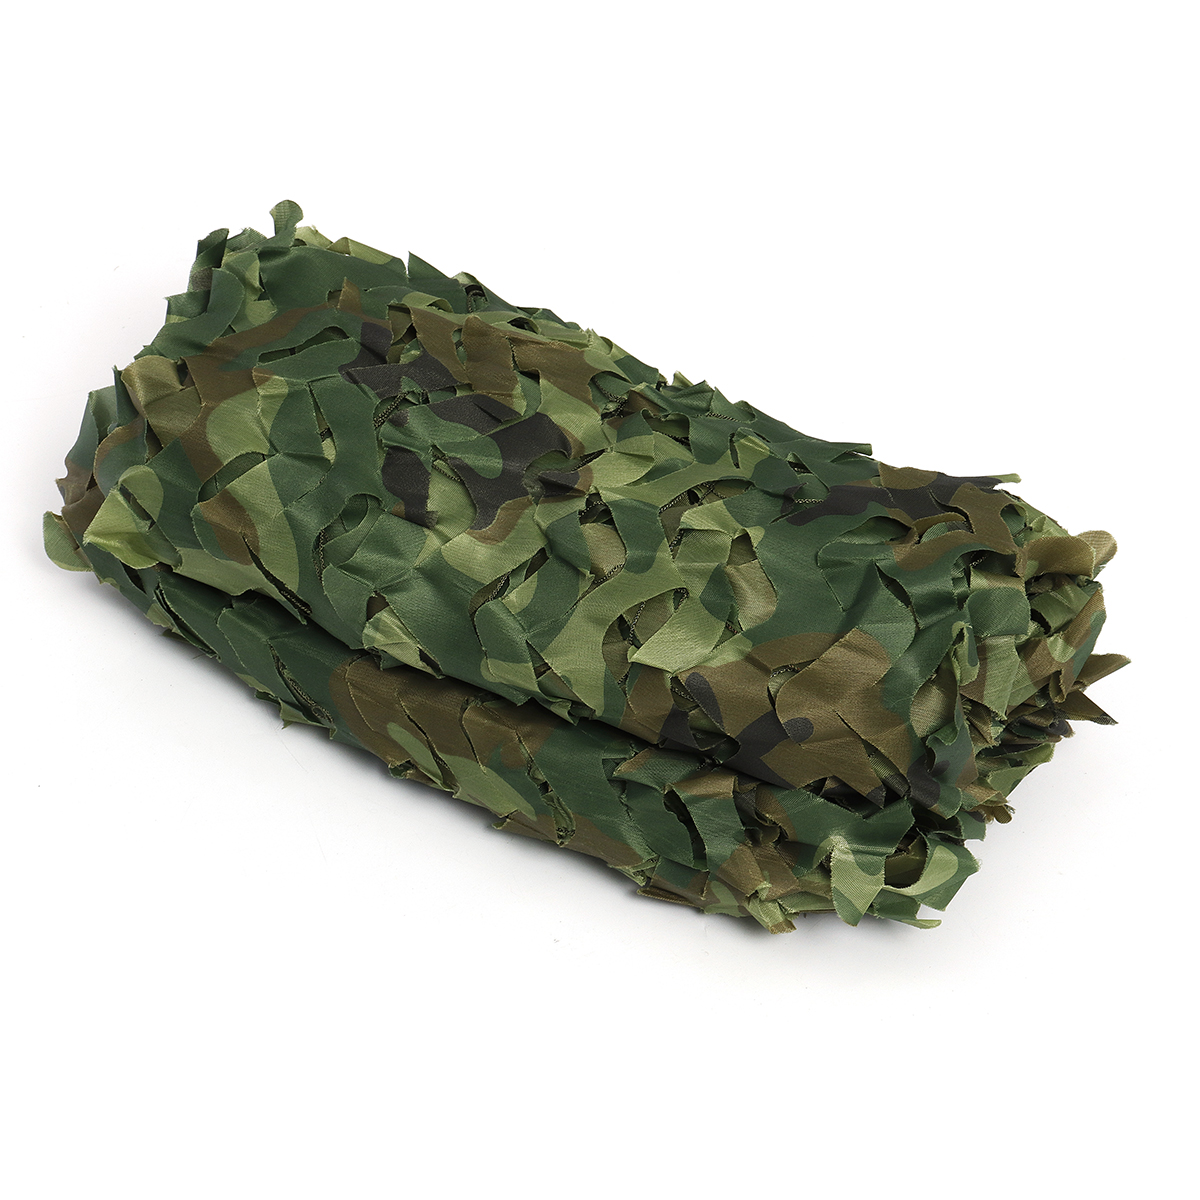 Camouflage-Army-Green-Trap-Net-Military-Hunting-Trap-Woodland-Leaves-Sunshade-Net-1556941-4